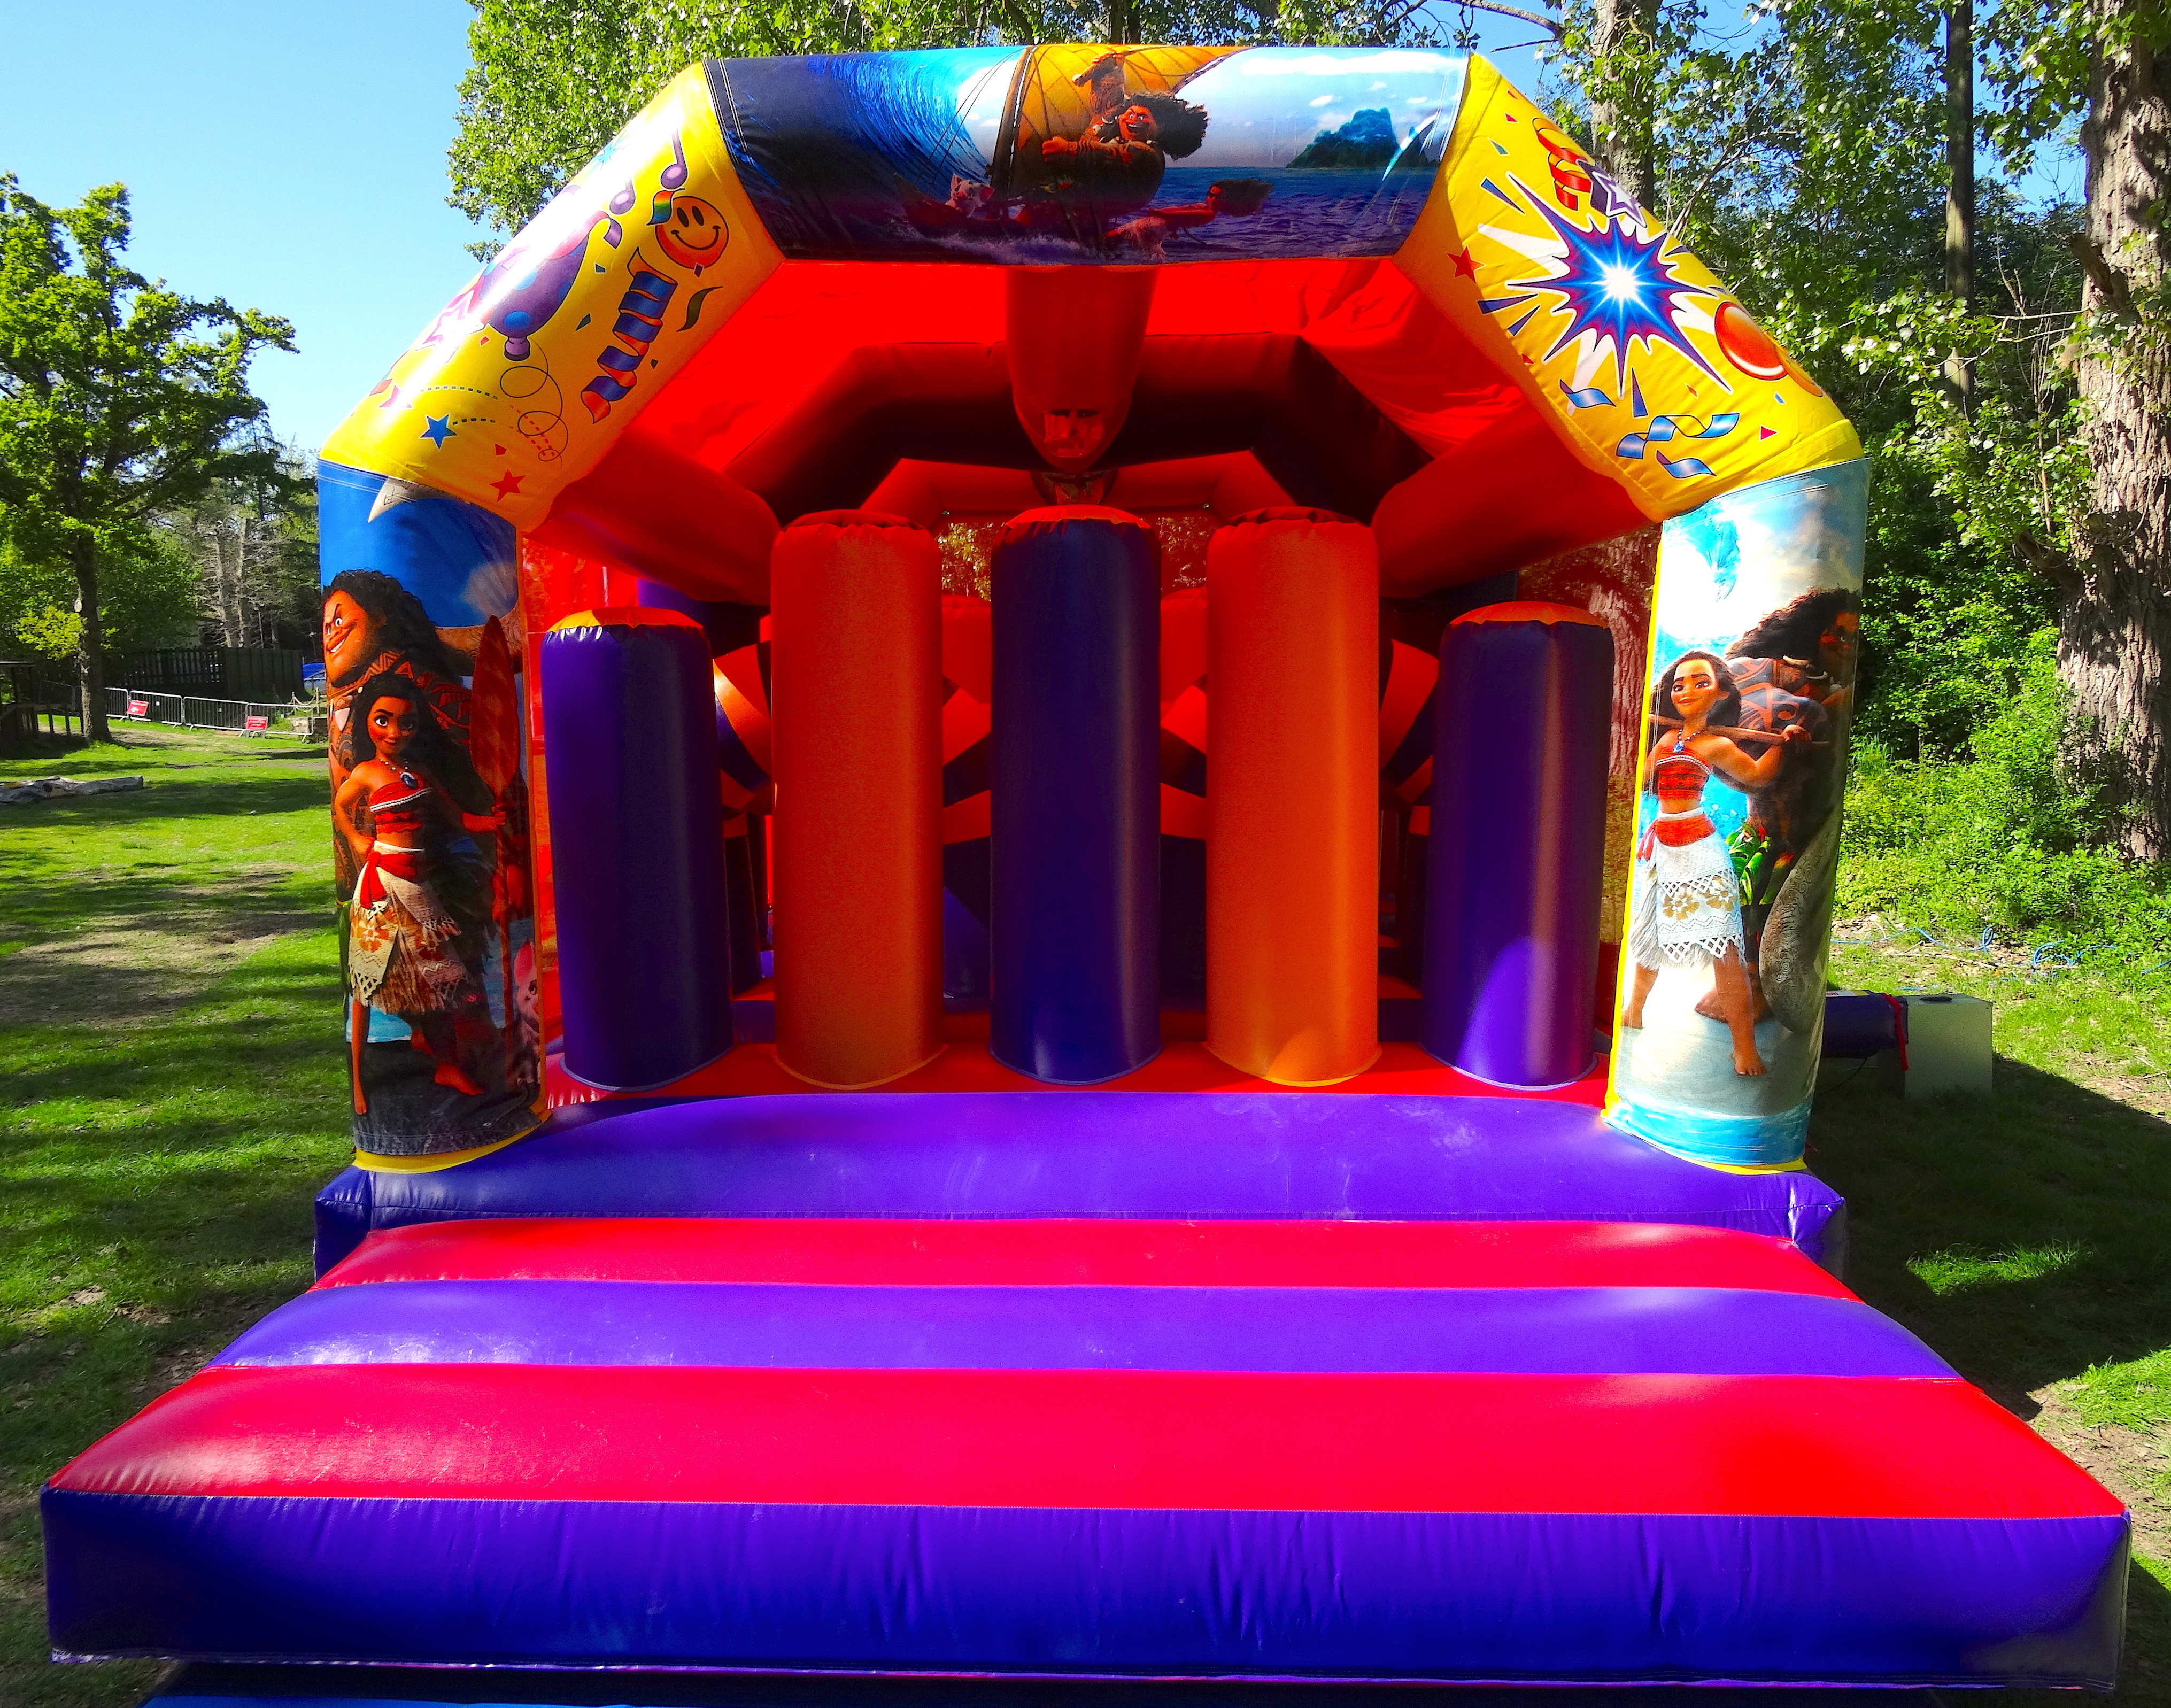 Moana Obstacle Disco Bouncy Castle Hire In Bromley Croydon South East London South West London